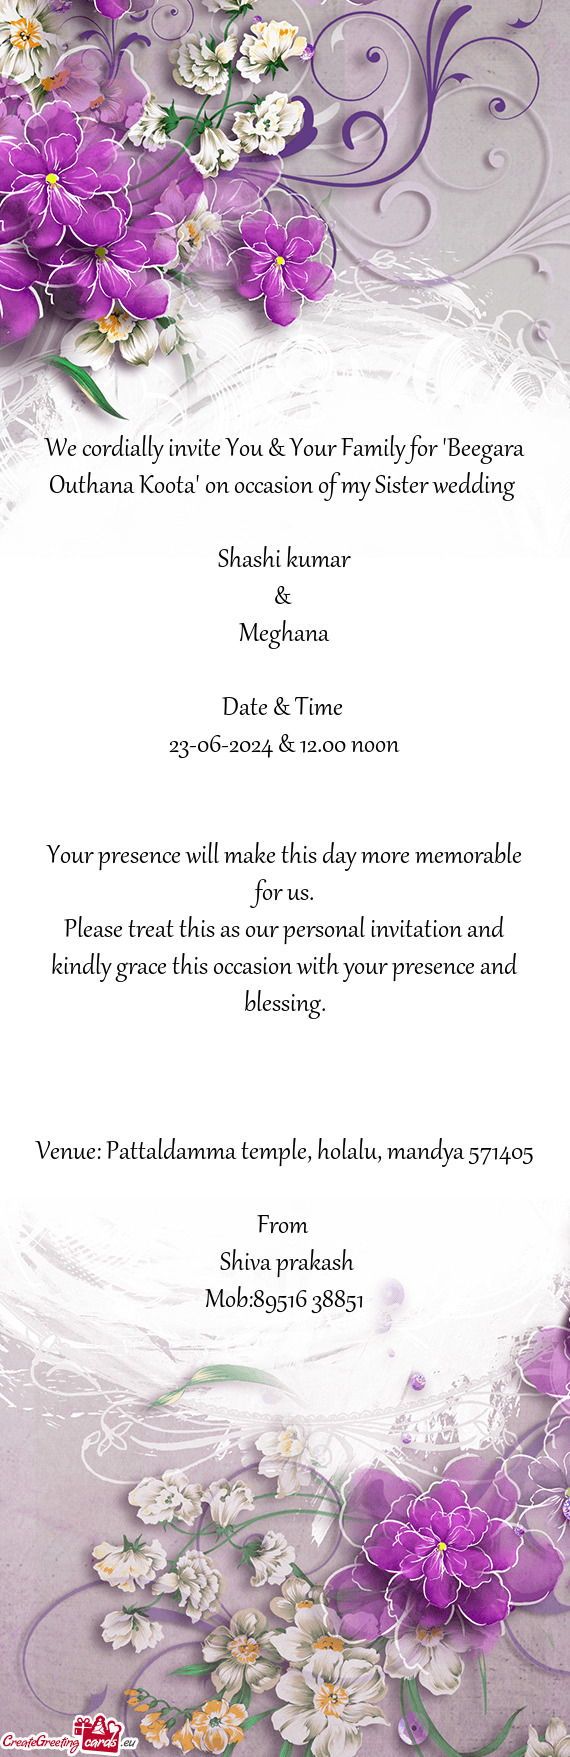 We cordially invite You & Your Family for "Beegara Outhana Koota" on occasion of my Sister wedding